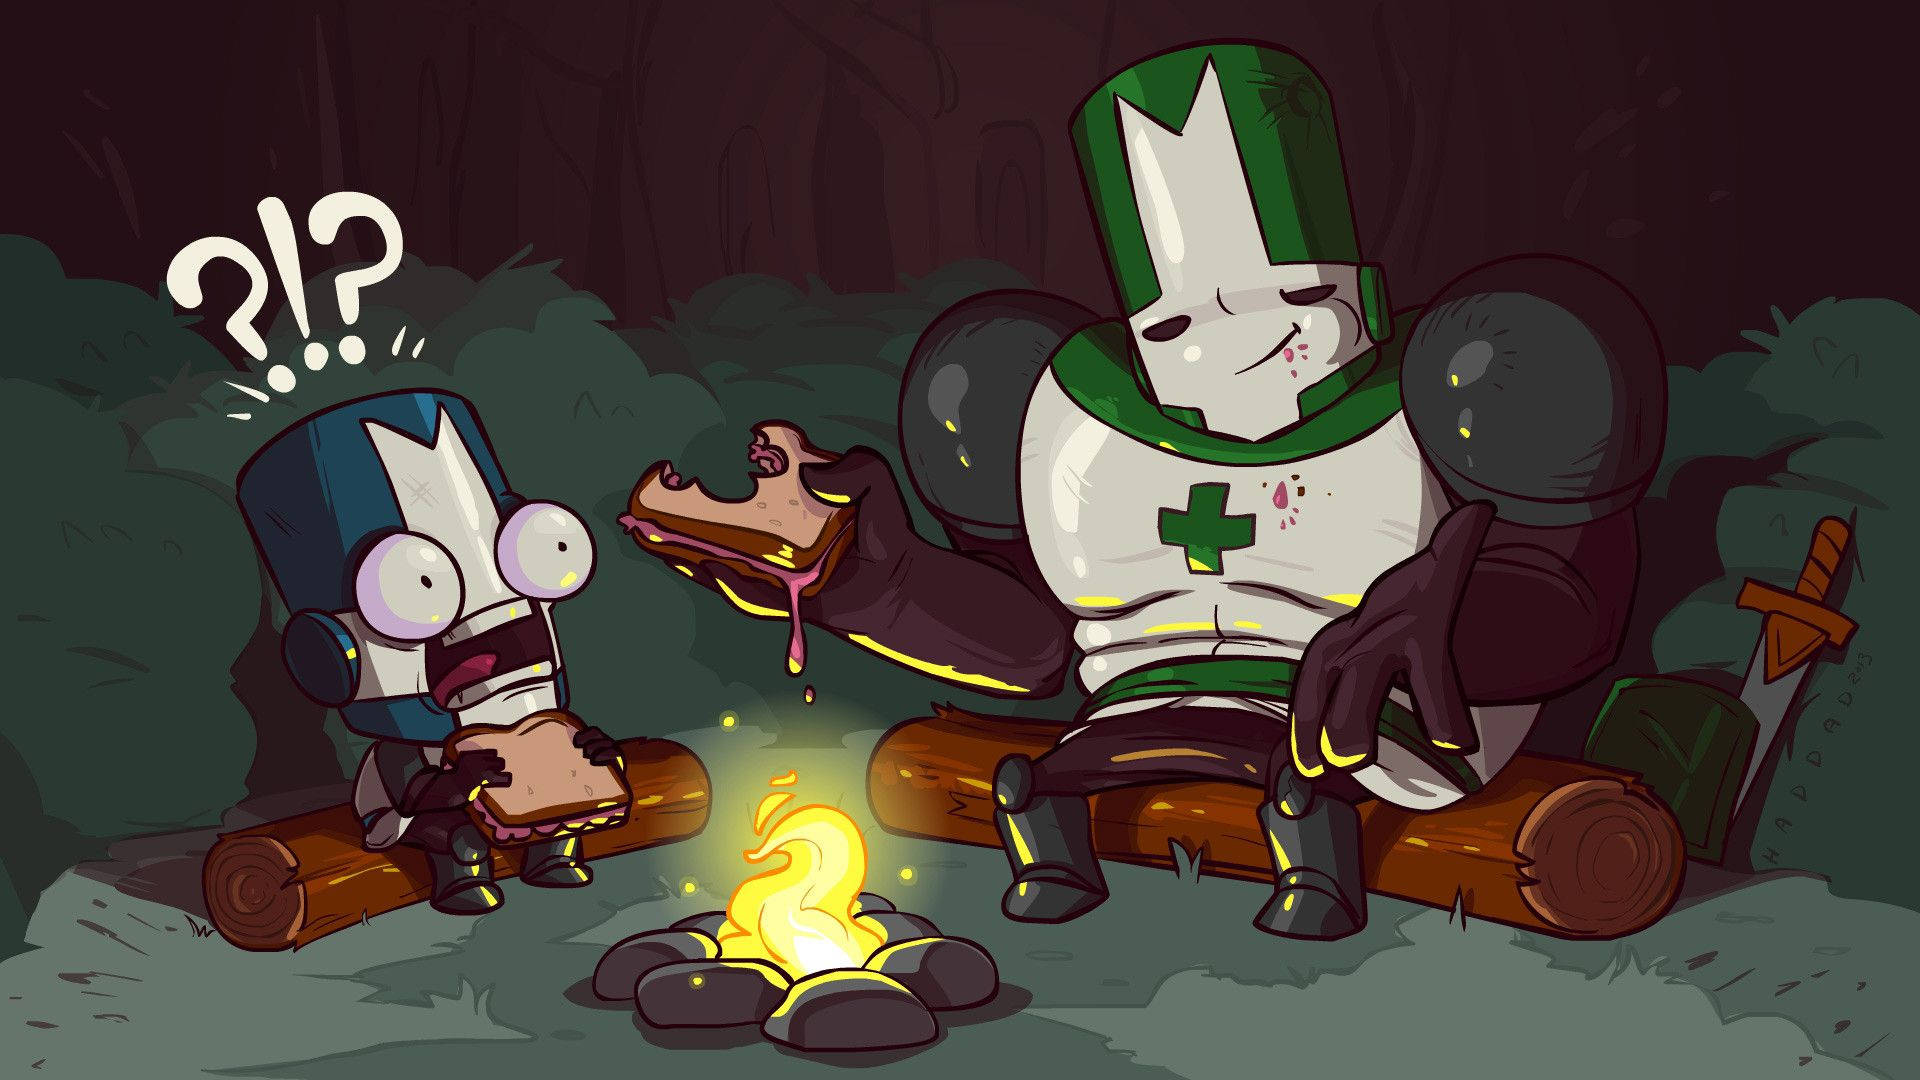 castle crashers knights - Google Search